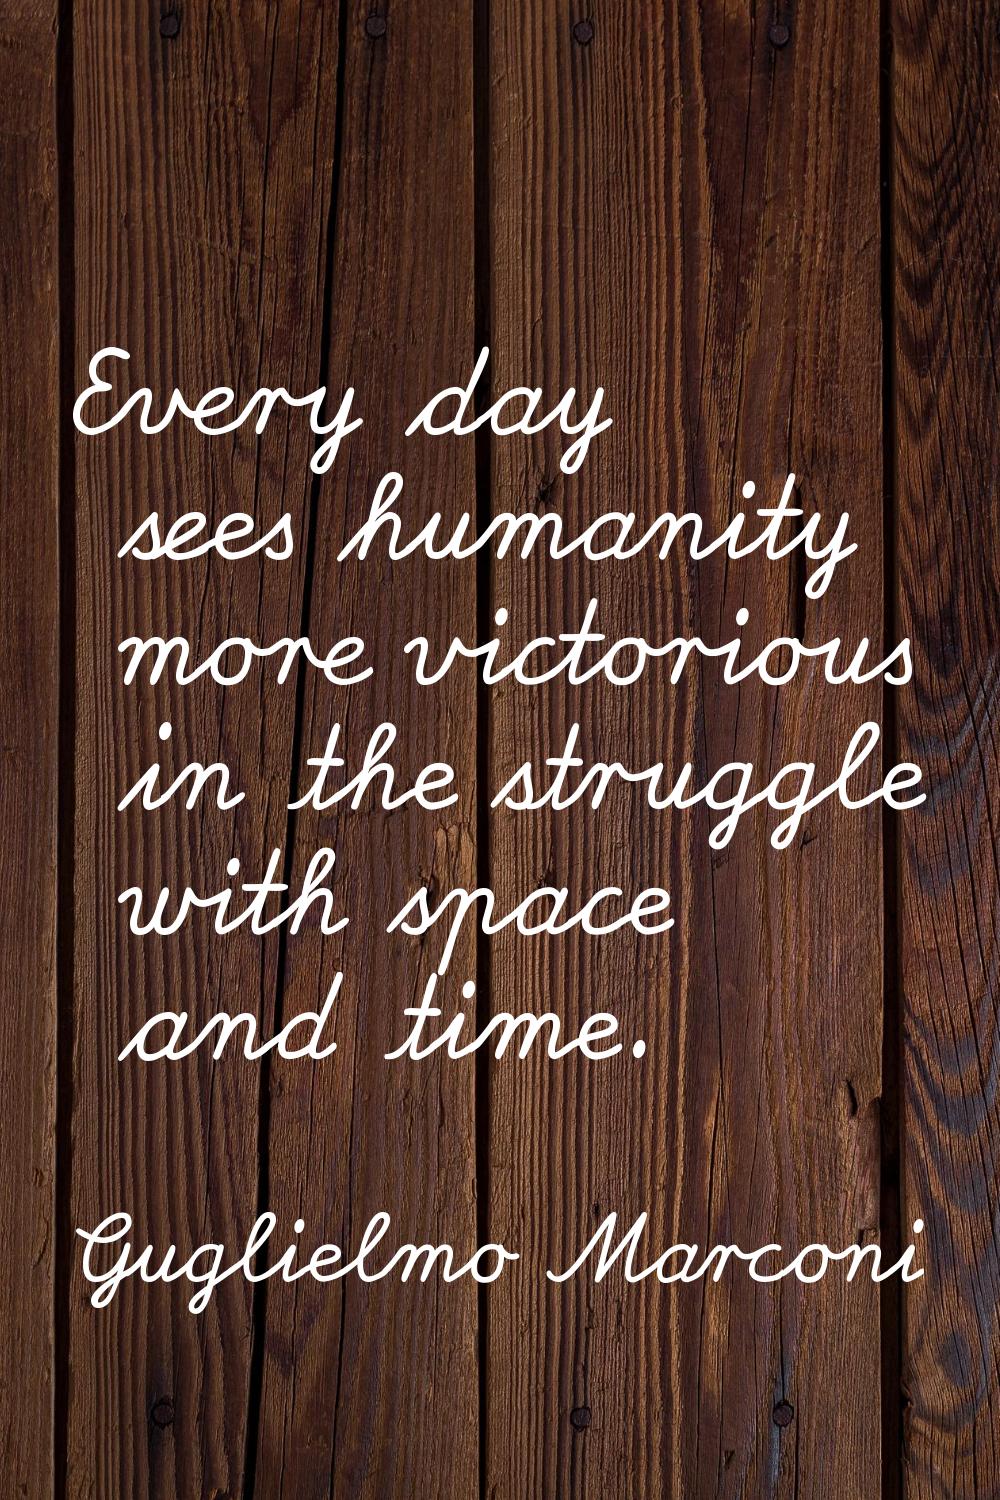 Every day sees humanity more victorious in the struggle with space and time.